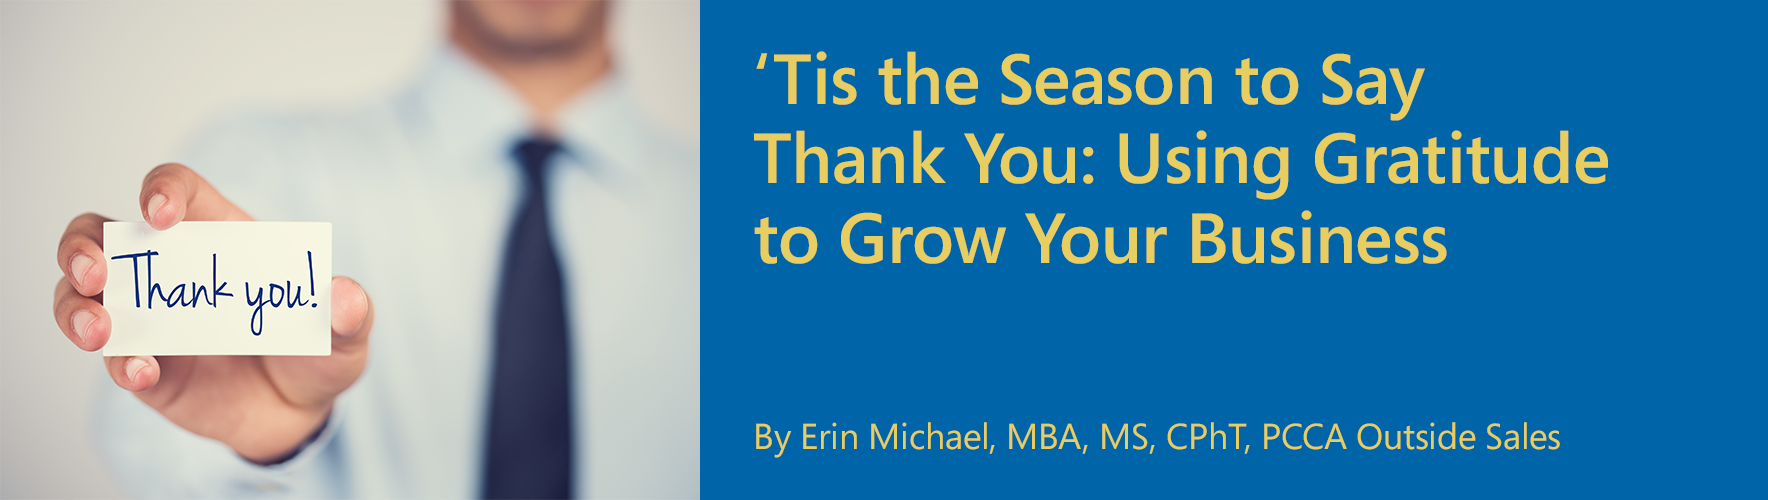 Tis_the_Season_to_Say_Thank_You_Using_Gratitude_to_Grow_Your_Business.png